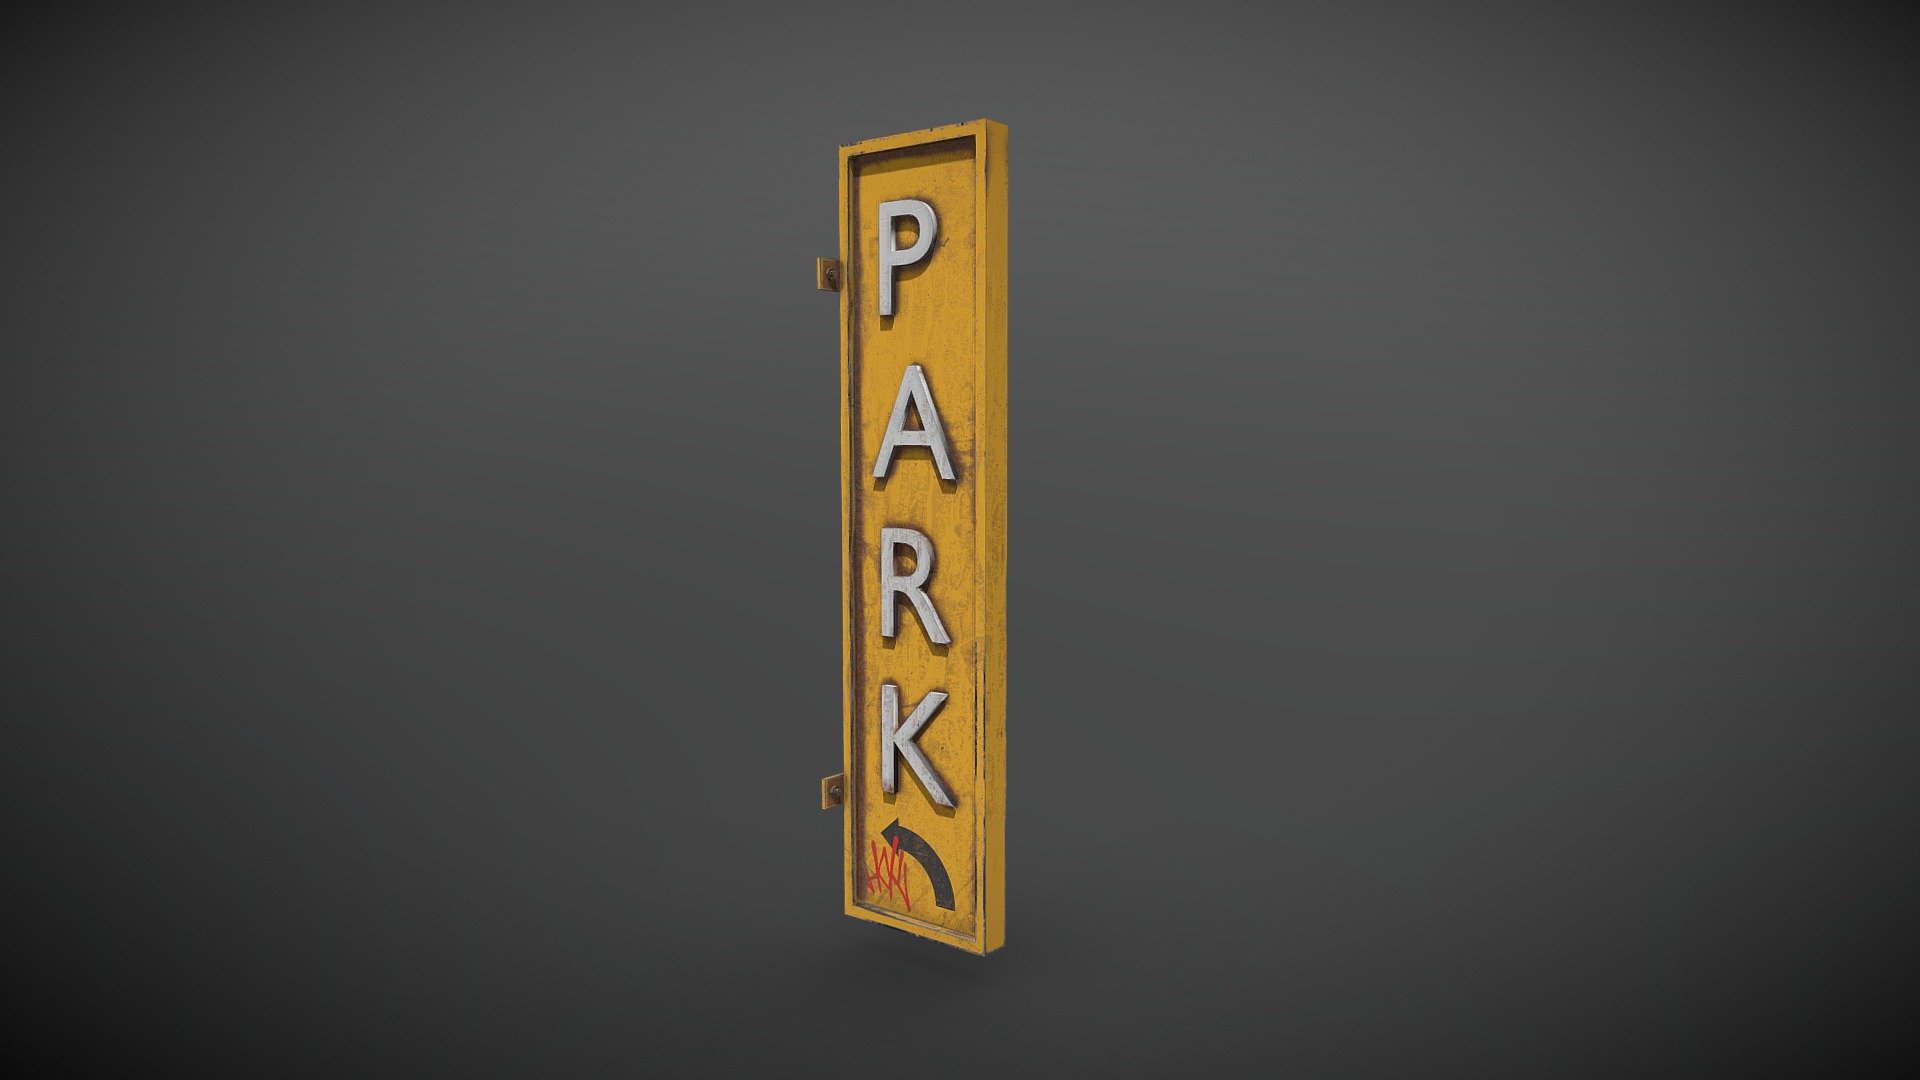 Rust parking sign

Textures size 4096x4096

Materials: 1

Including maps: * Base Color * Roughness * Metallic * Normal * Height

Created in Blender The texture was created in Substance 3D Painter - Parking sign - Download Free 3D model by exiS7-Gs 3d model